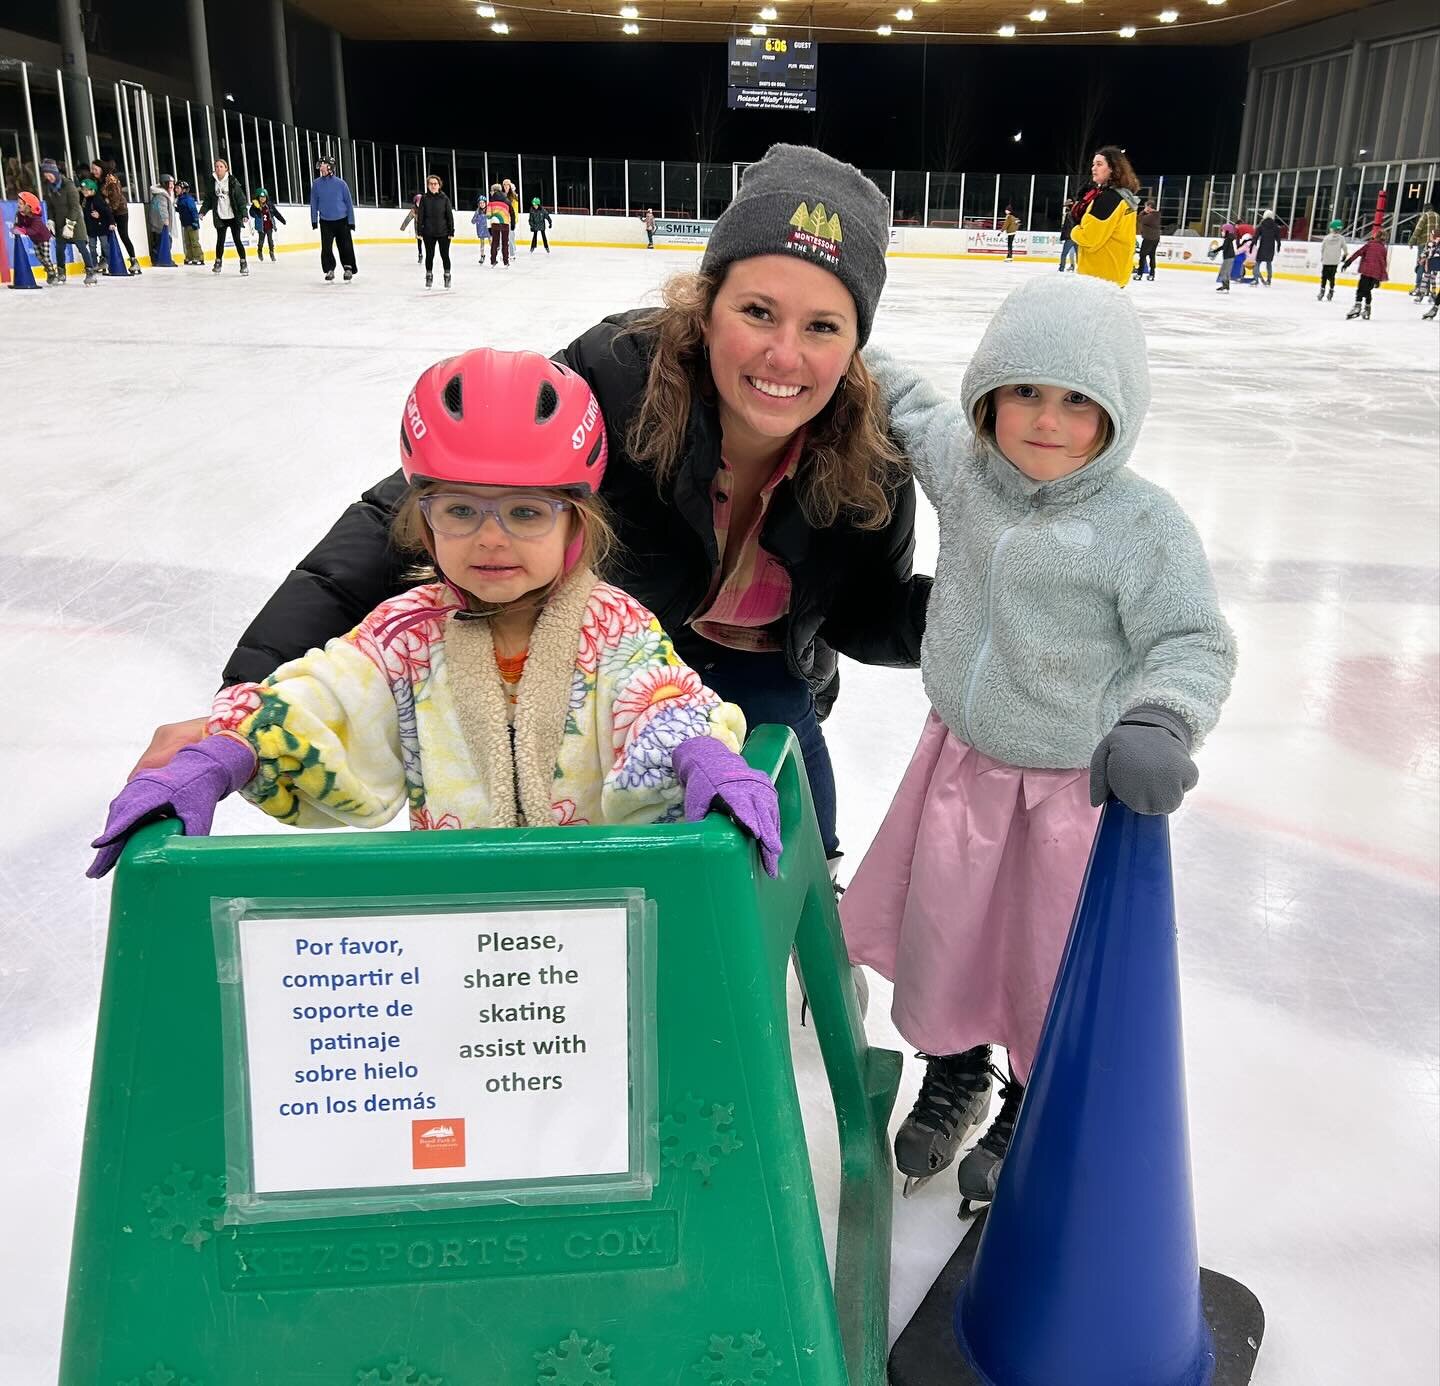 Welp, didn&rsquo;t take many pictures, as we were too busy having a blast! So proud of all our brave little skaters and constantly thankful for this beautiful community we are co-creating with our families. It was a joy to see all our friends old and